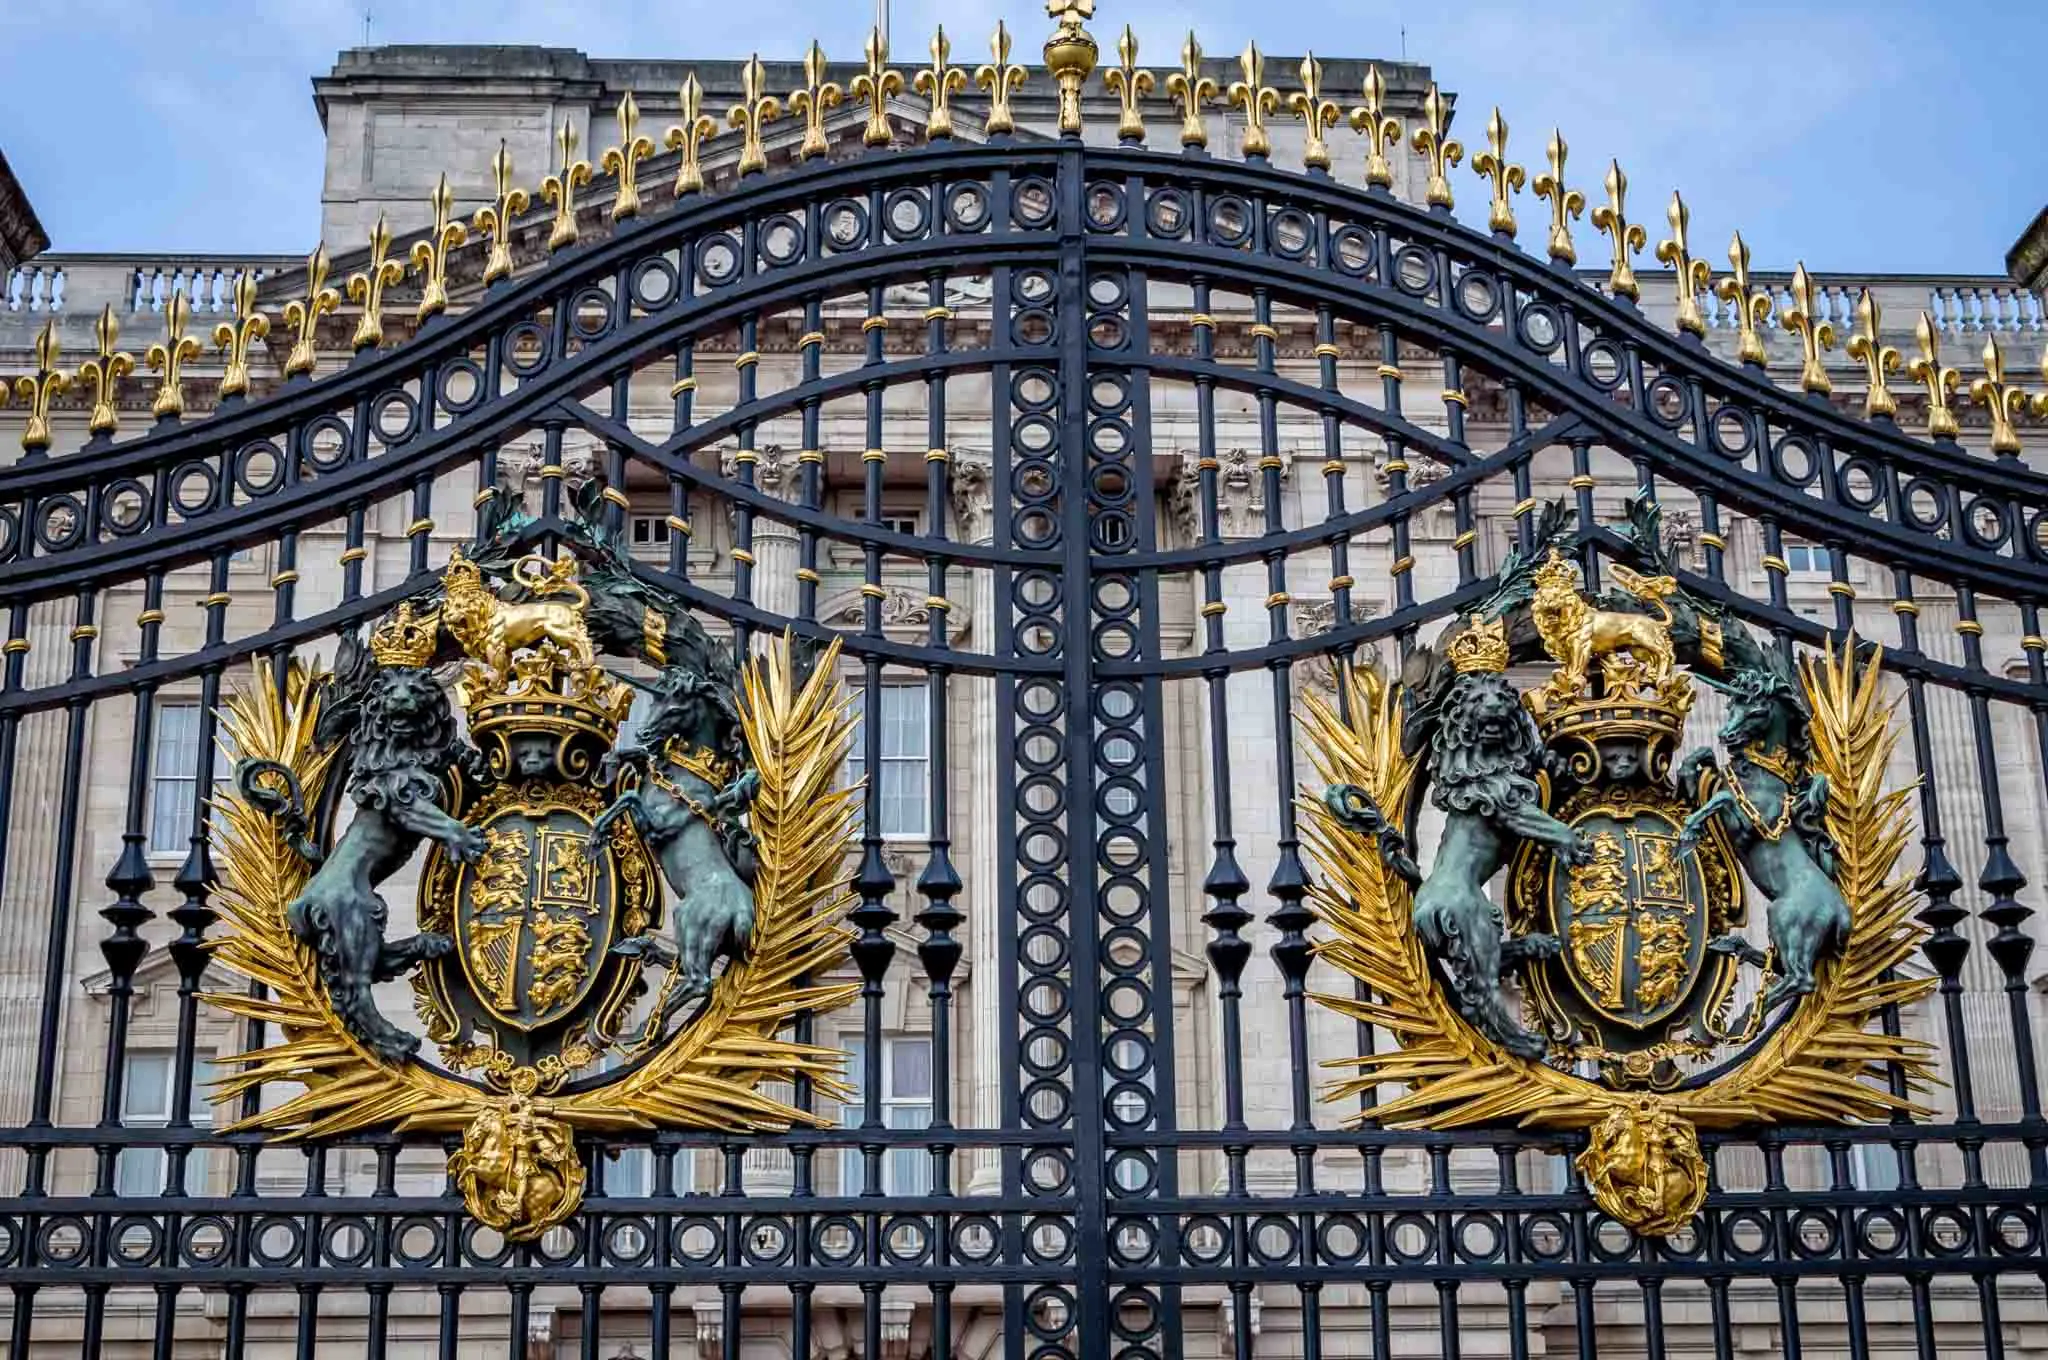 Buckingham Palace gates with crests showing lions and coat of arms